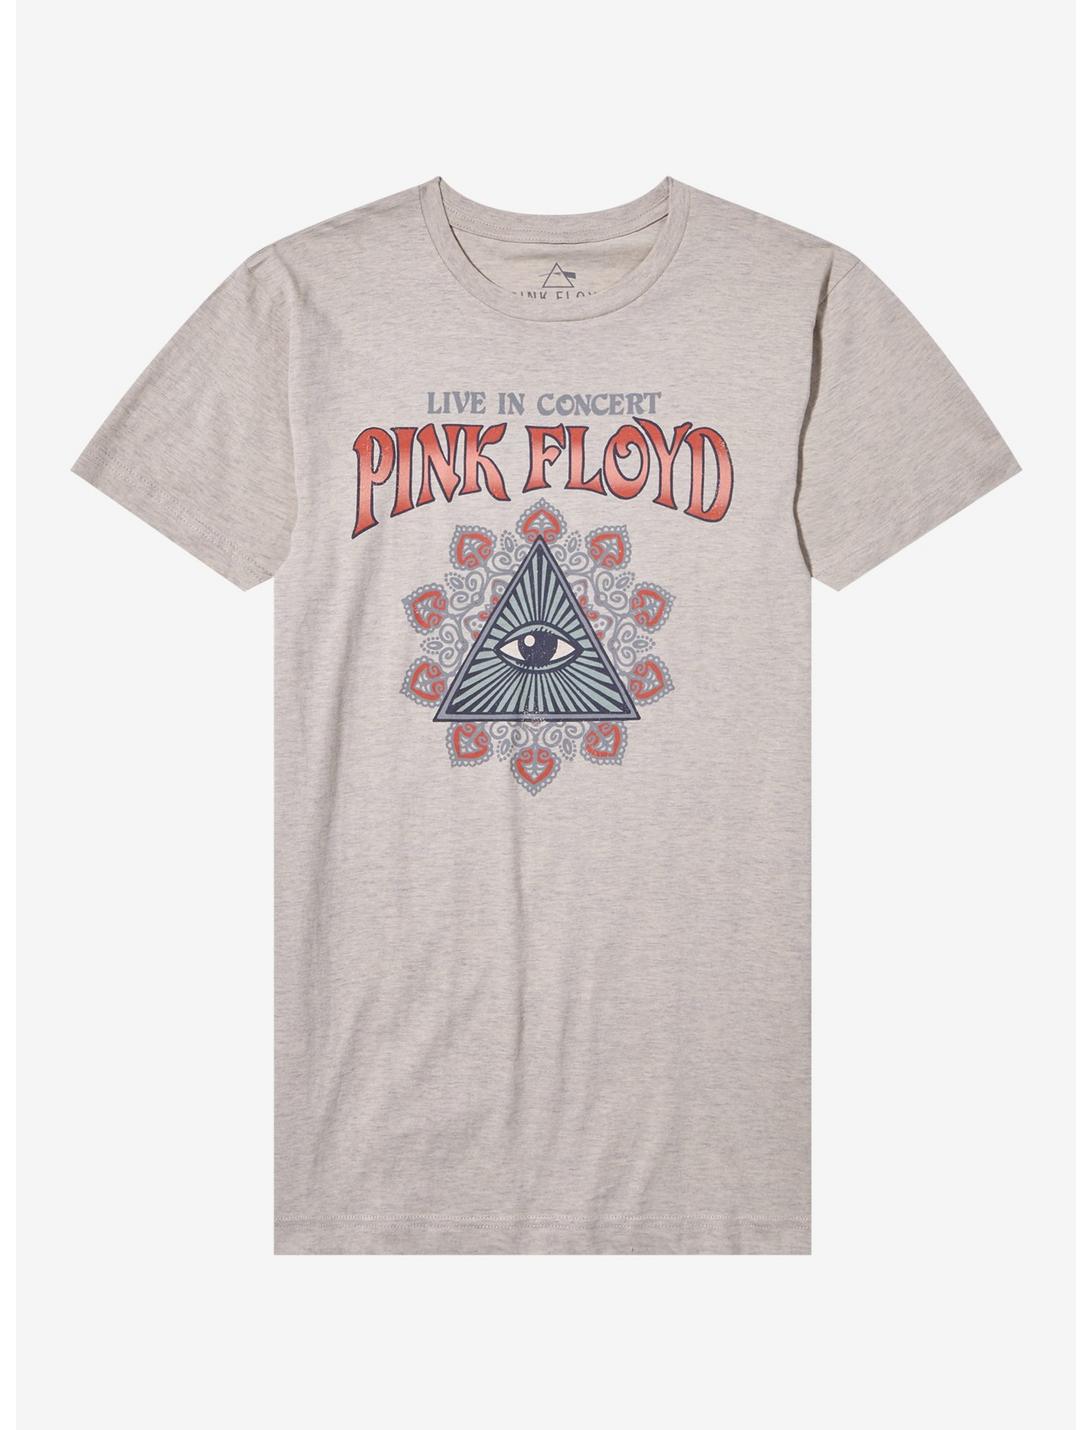 Pink Floyd Live In Concert Pyramid Eye T-Shirt, OATMEAL, hi-res